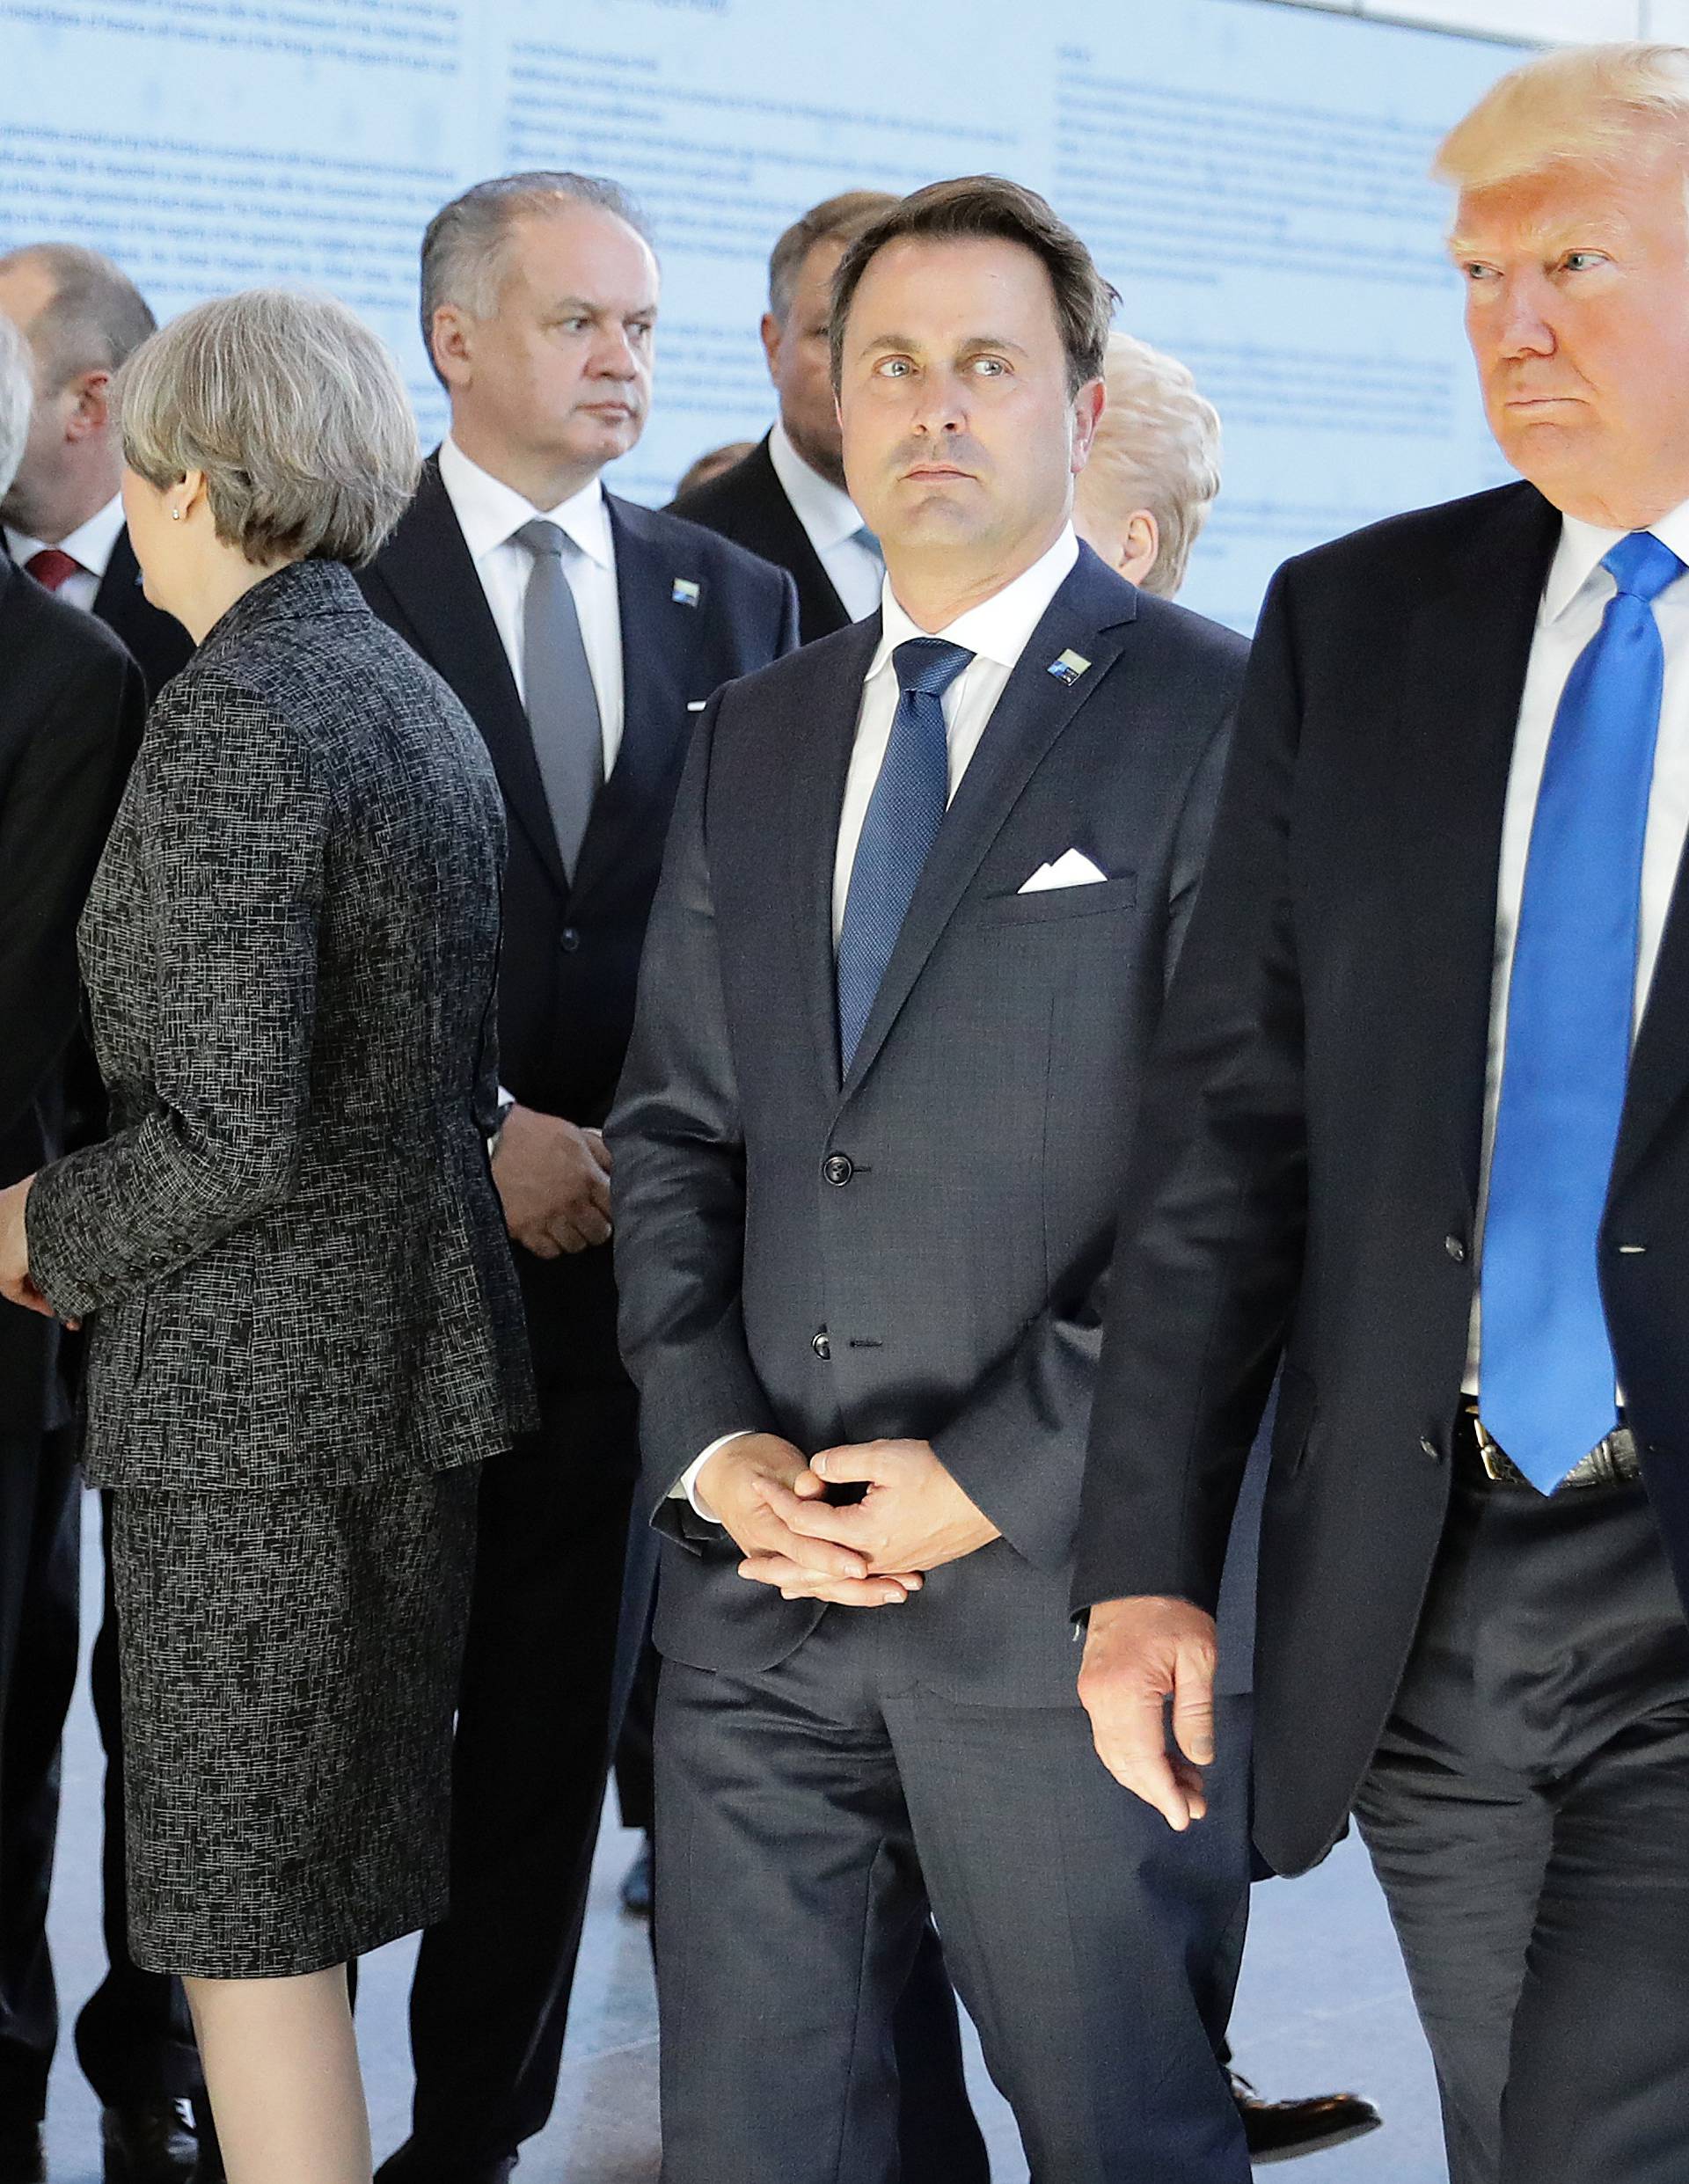 U.S. President Donald Trump and Luxembourg's Prime Minister Xavier Bettel walk past Britain's Prime Minster Theresa May before the start of the NATO summit at their new headquarters in Brussels